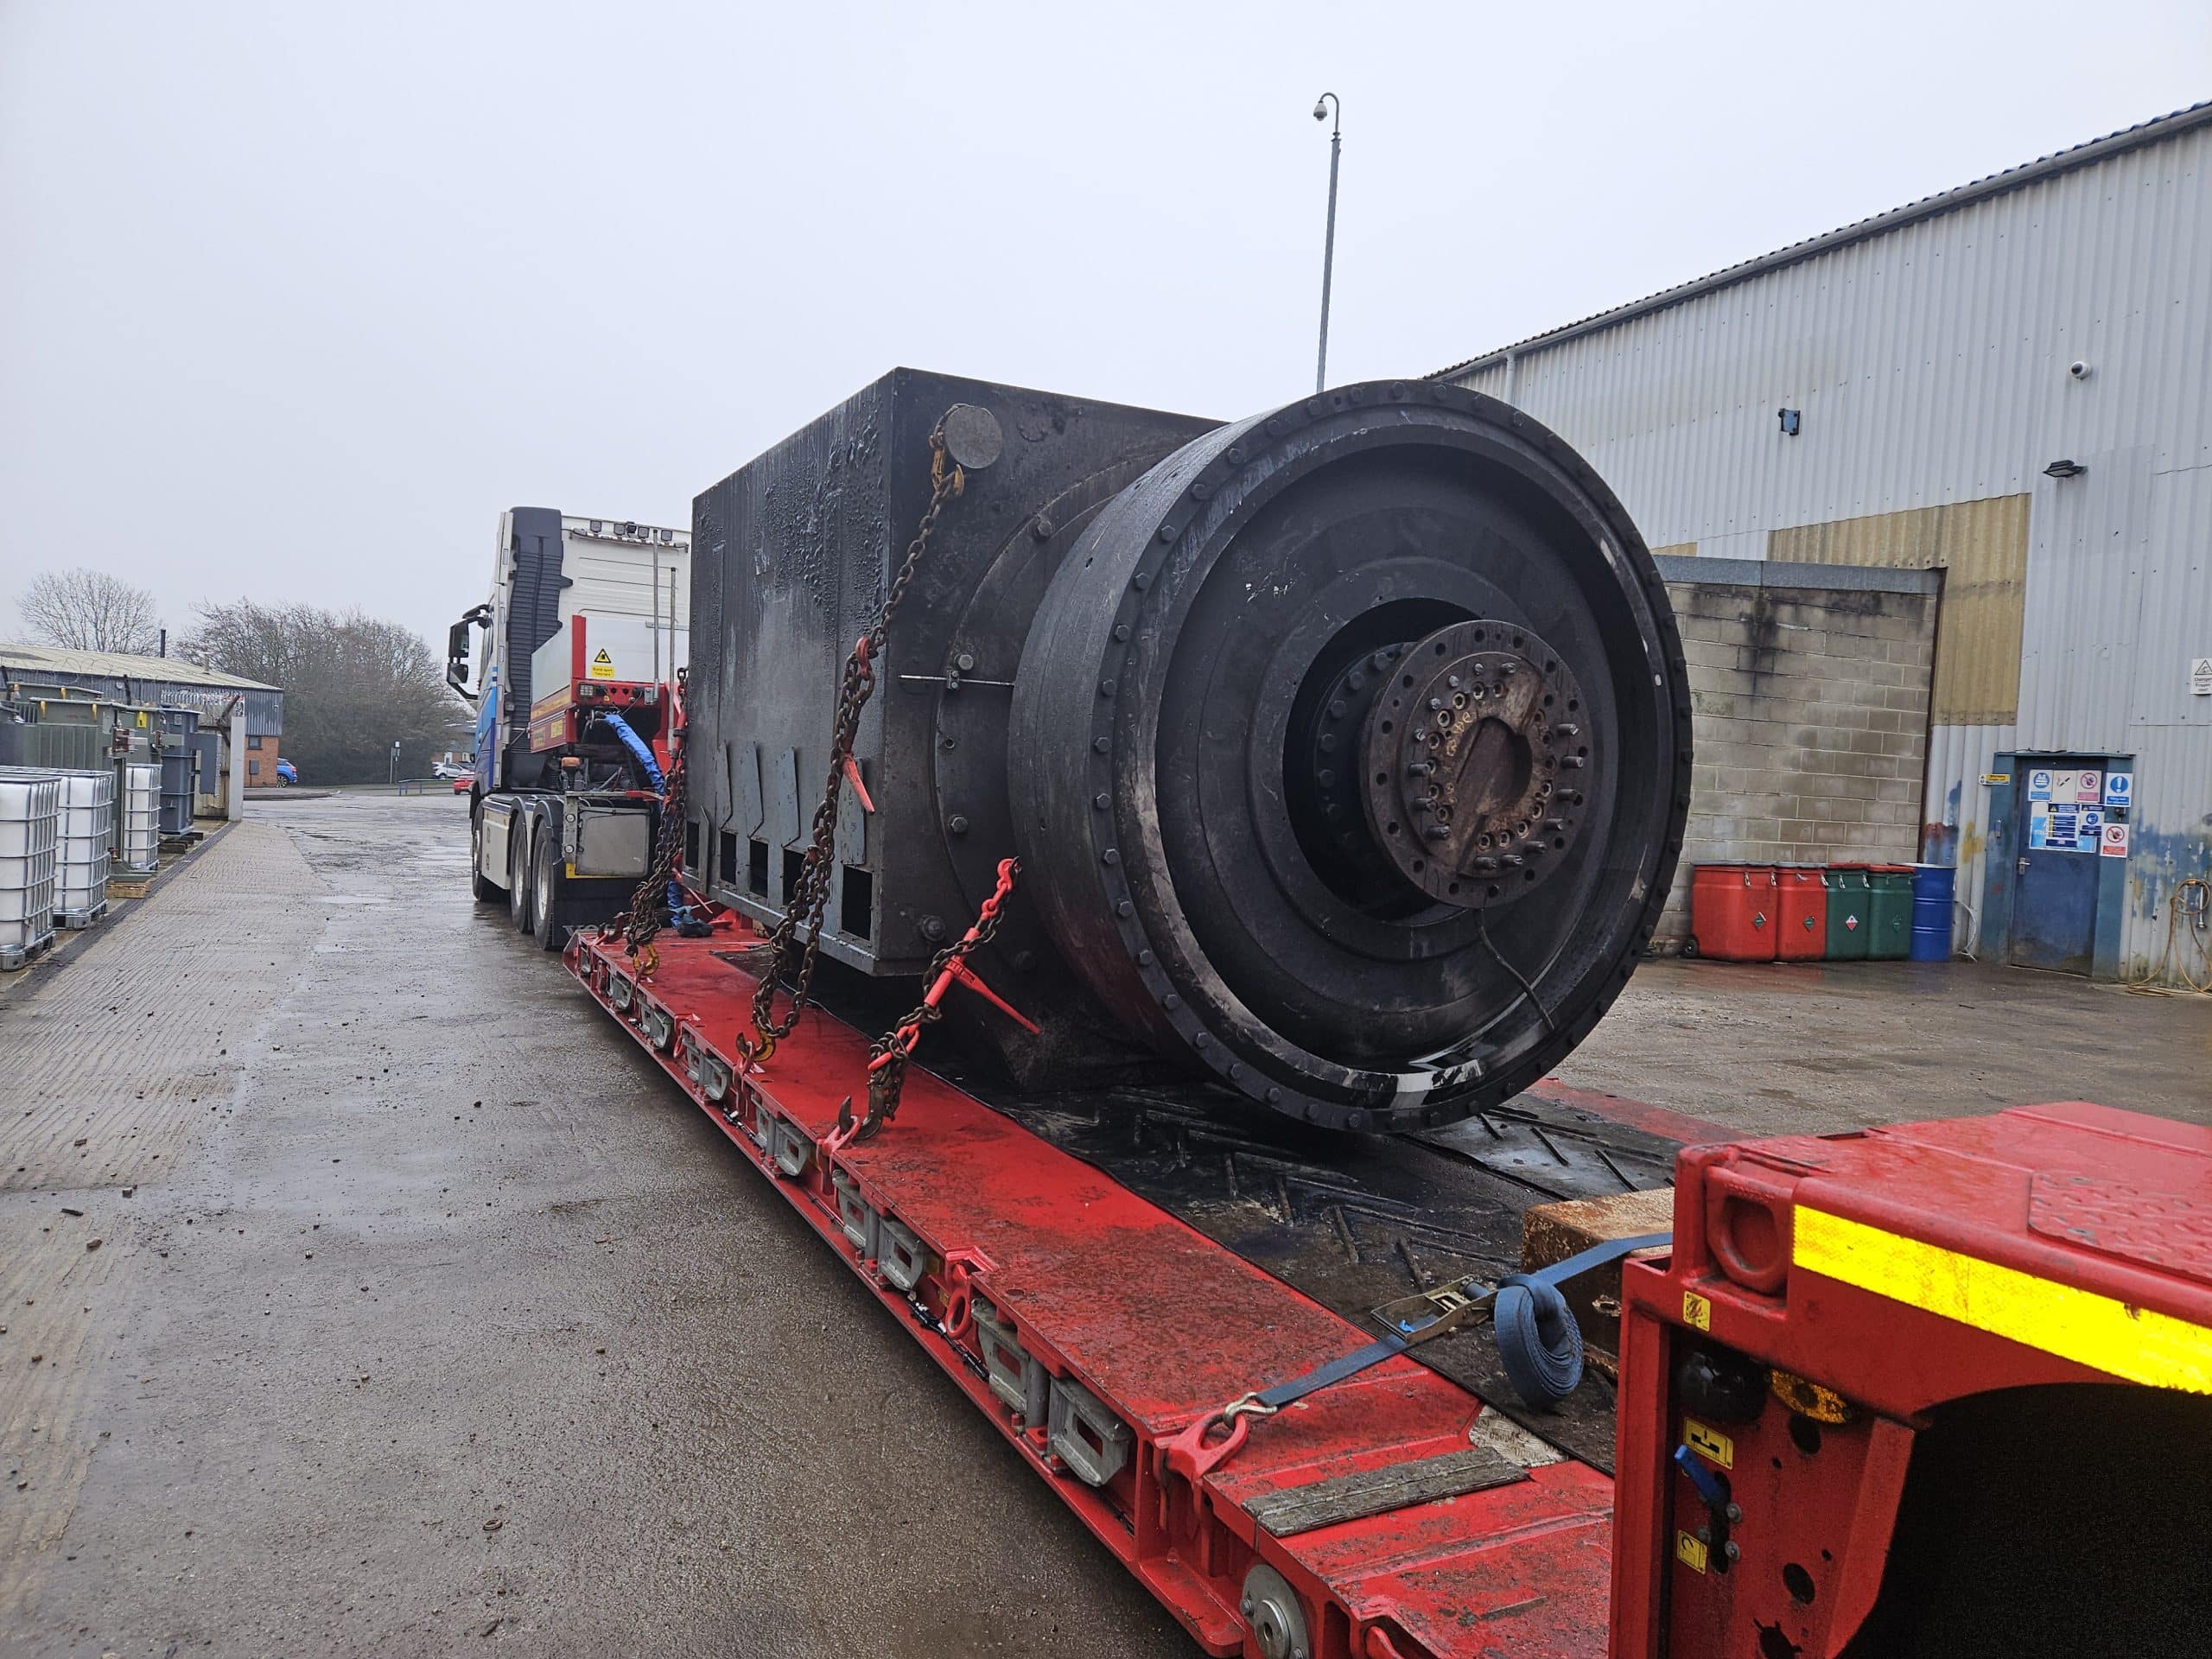 Motor arriving at Bowers Electricals for motor overhaul.